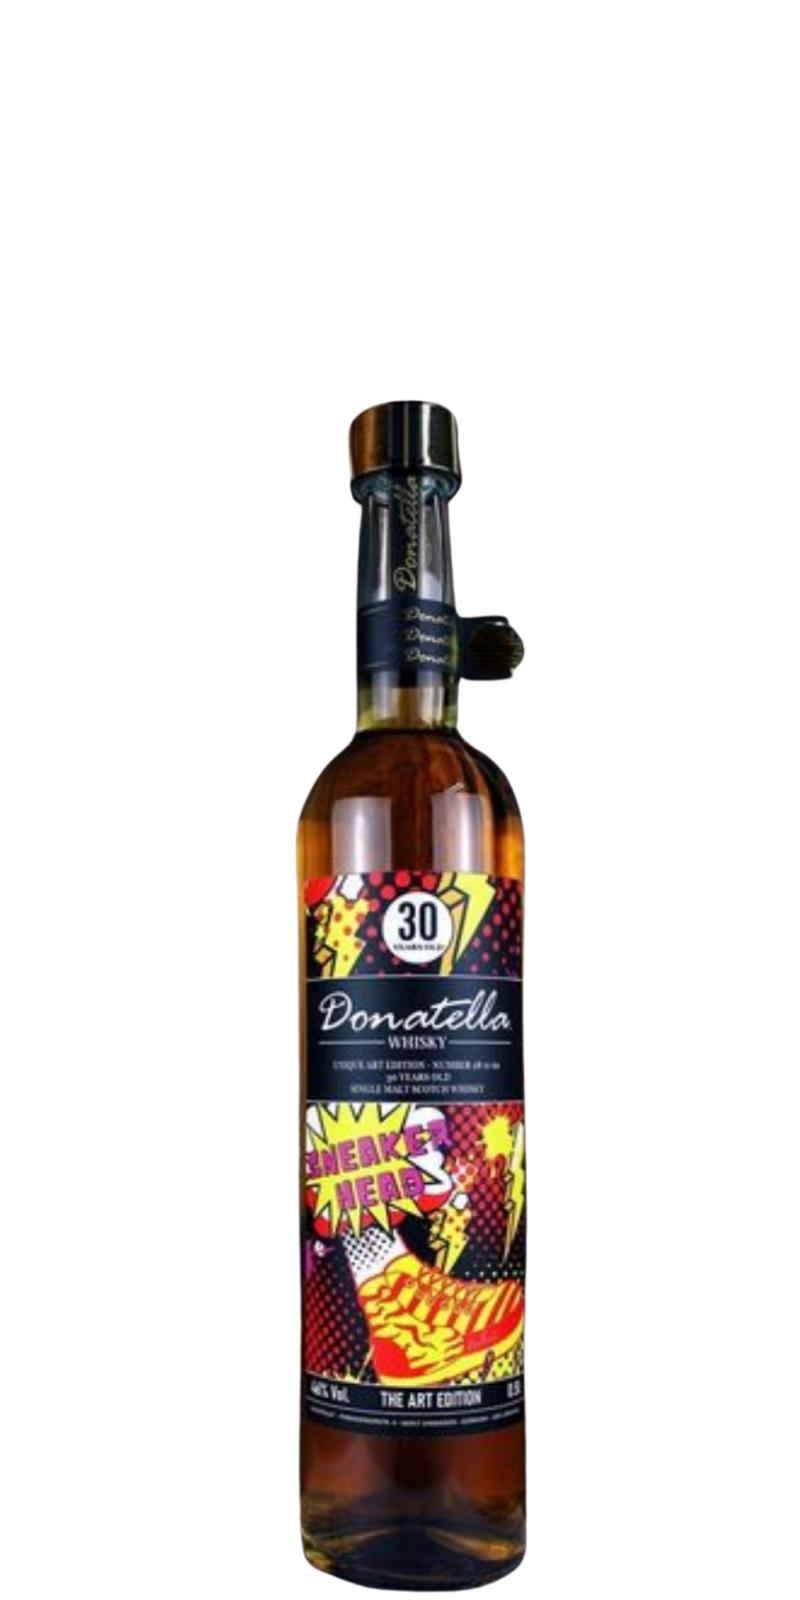 Donatella 30-year-old - Value and price information - Whiskystats